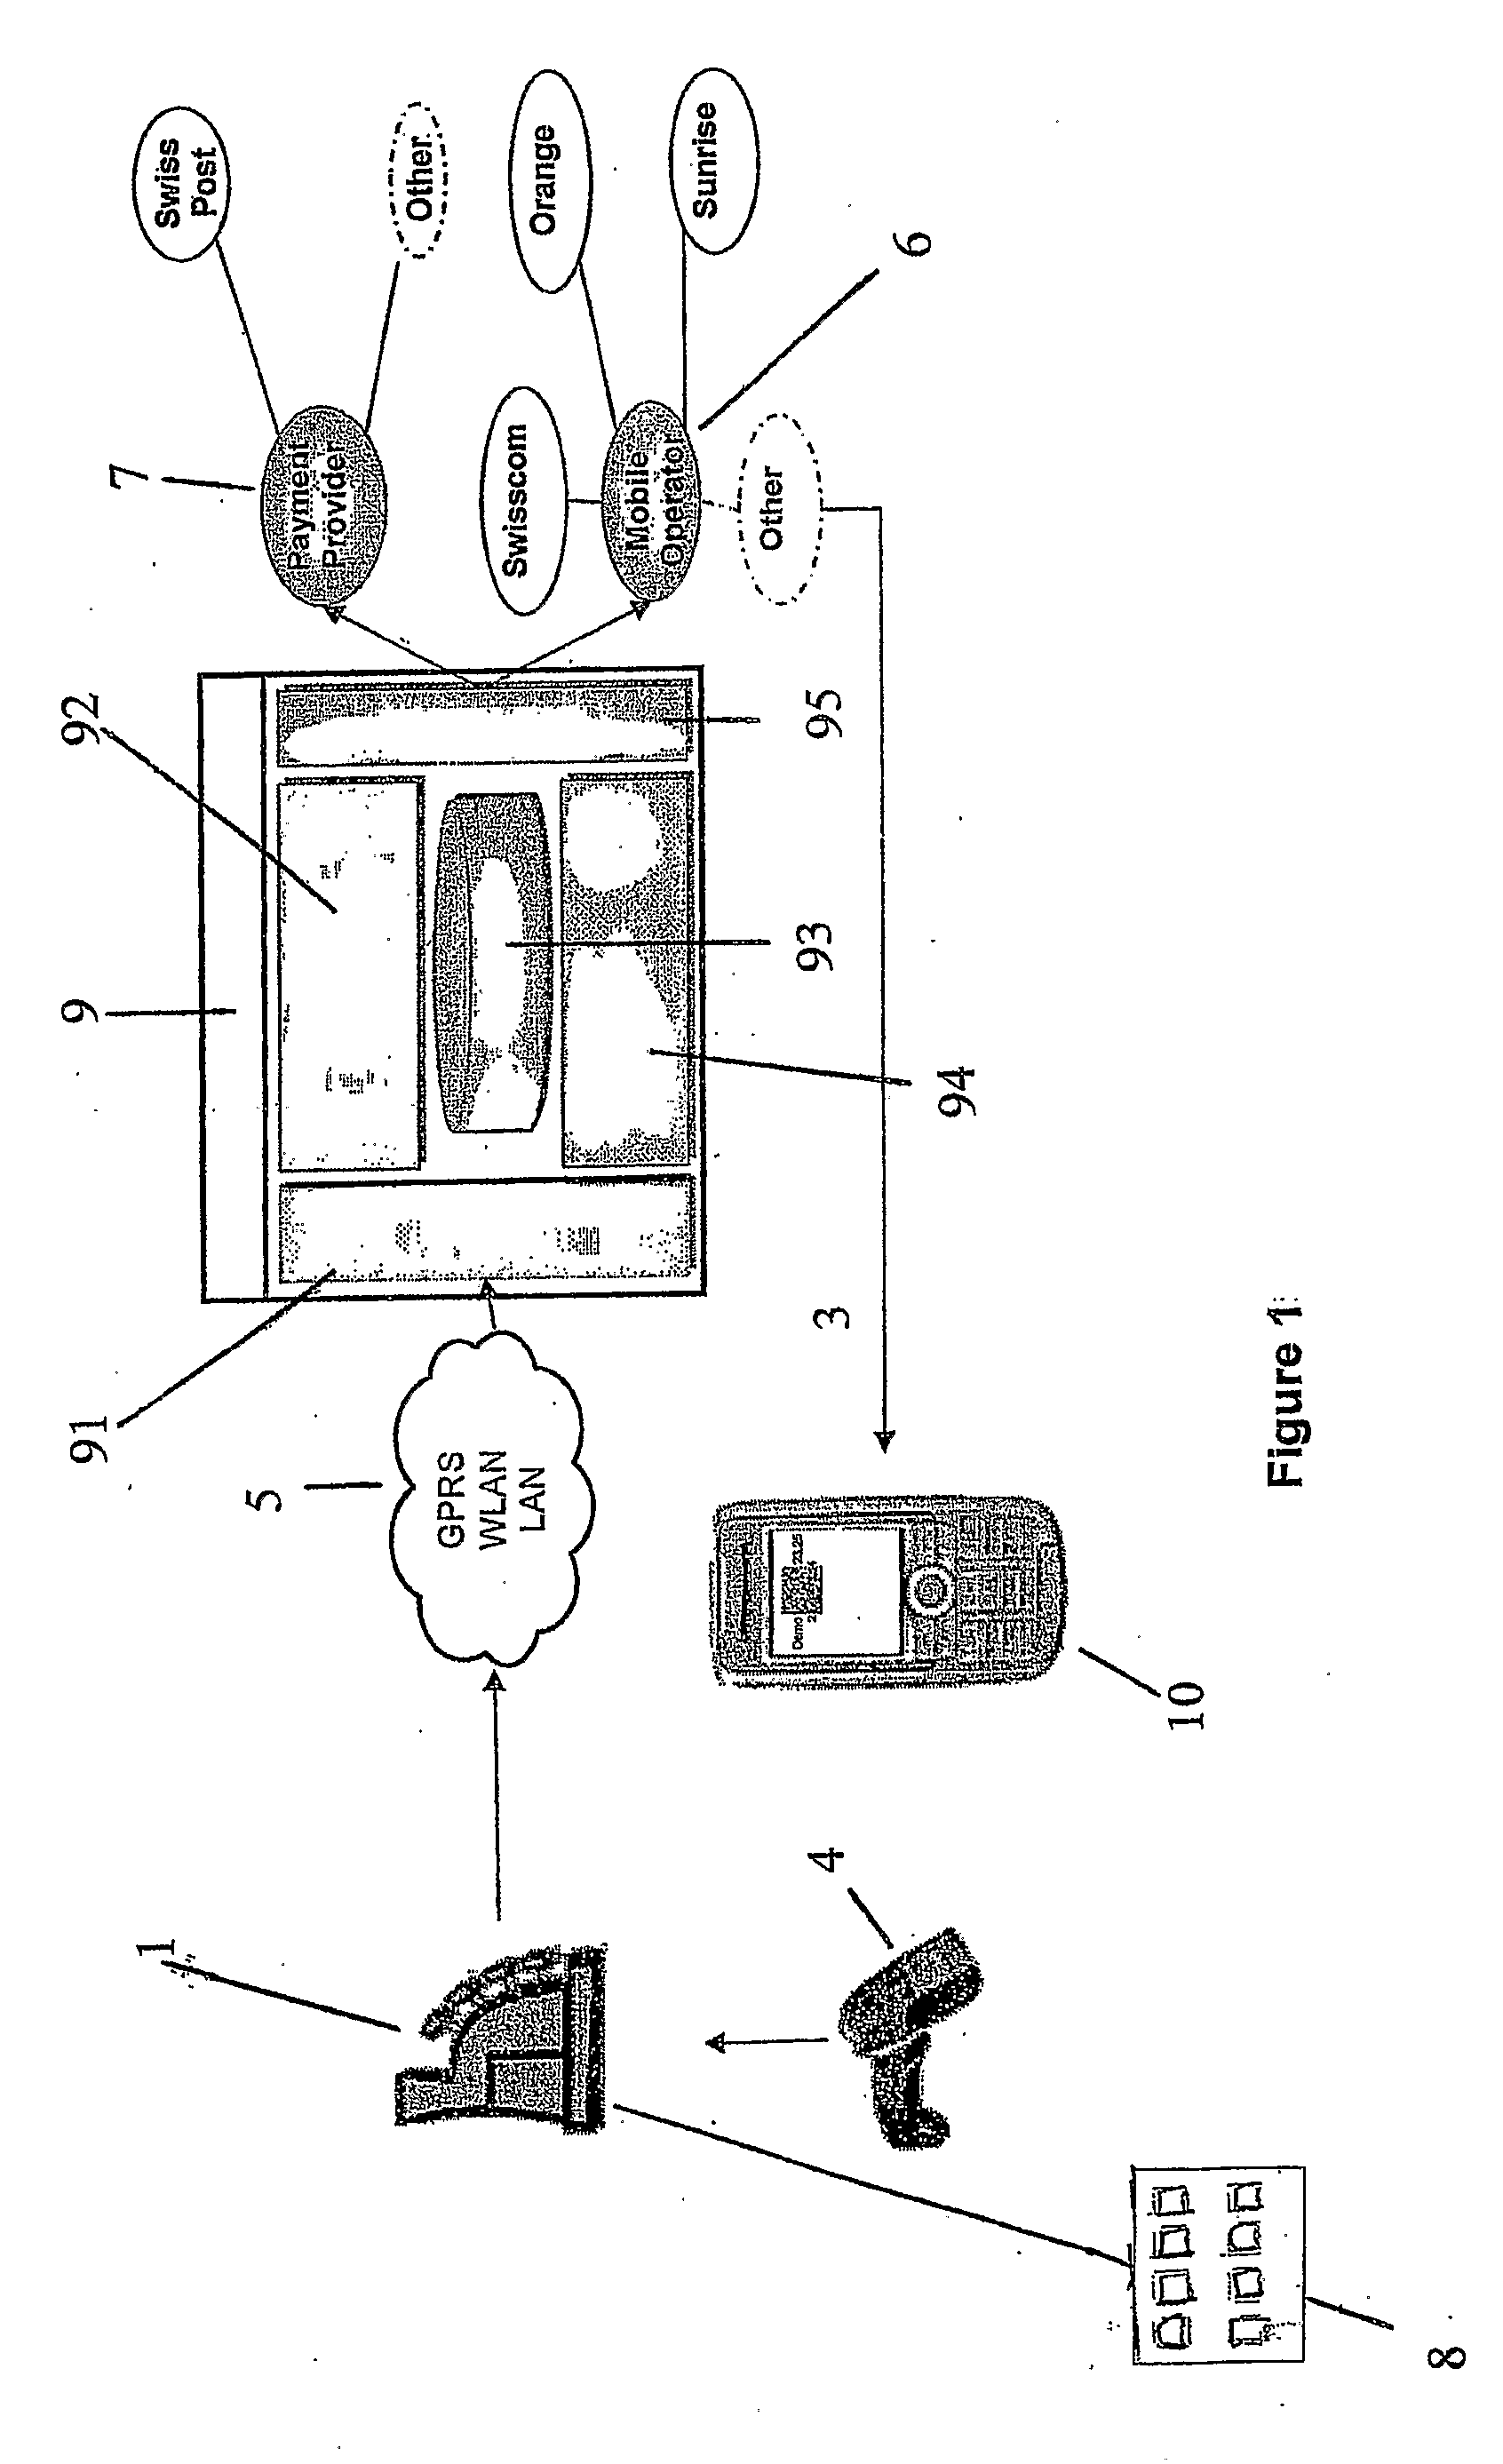 Communication System And Method Using Visual Interfaces For Mobile Transactions